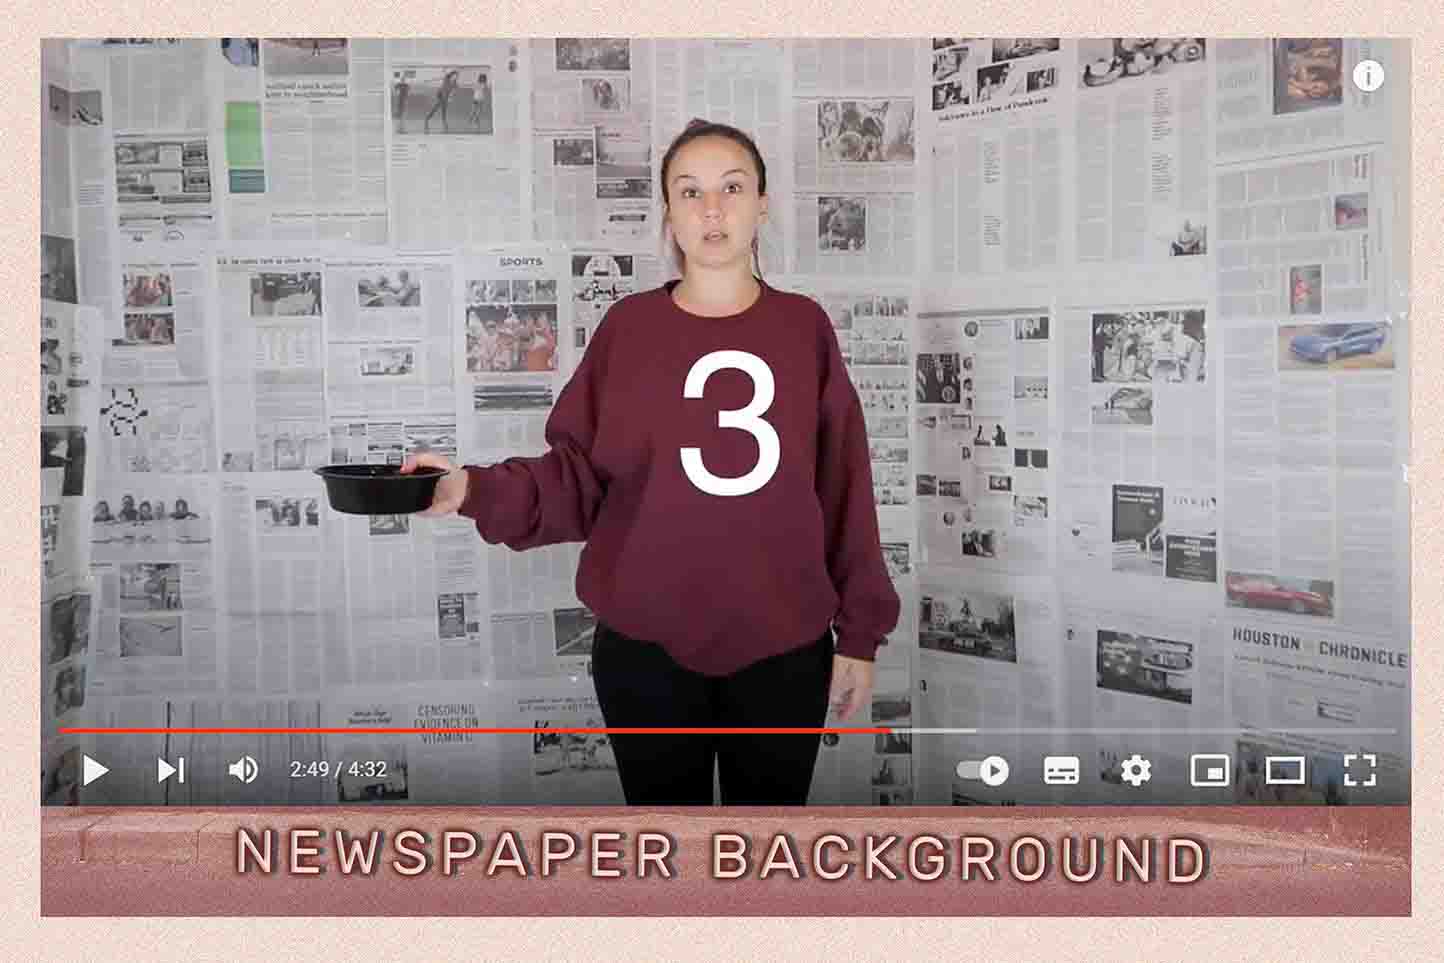 youtube-background-idea-with-newspaper